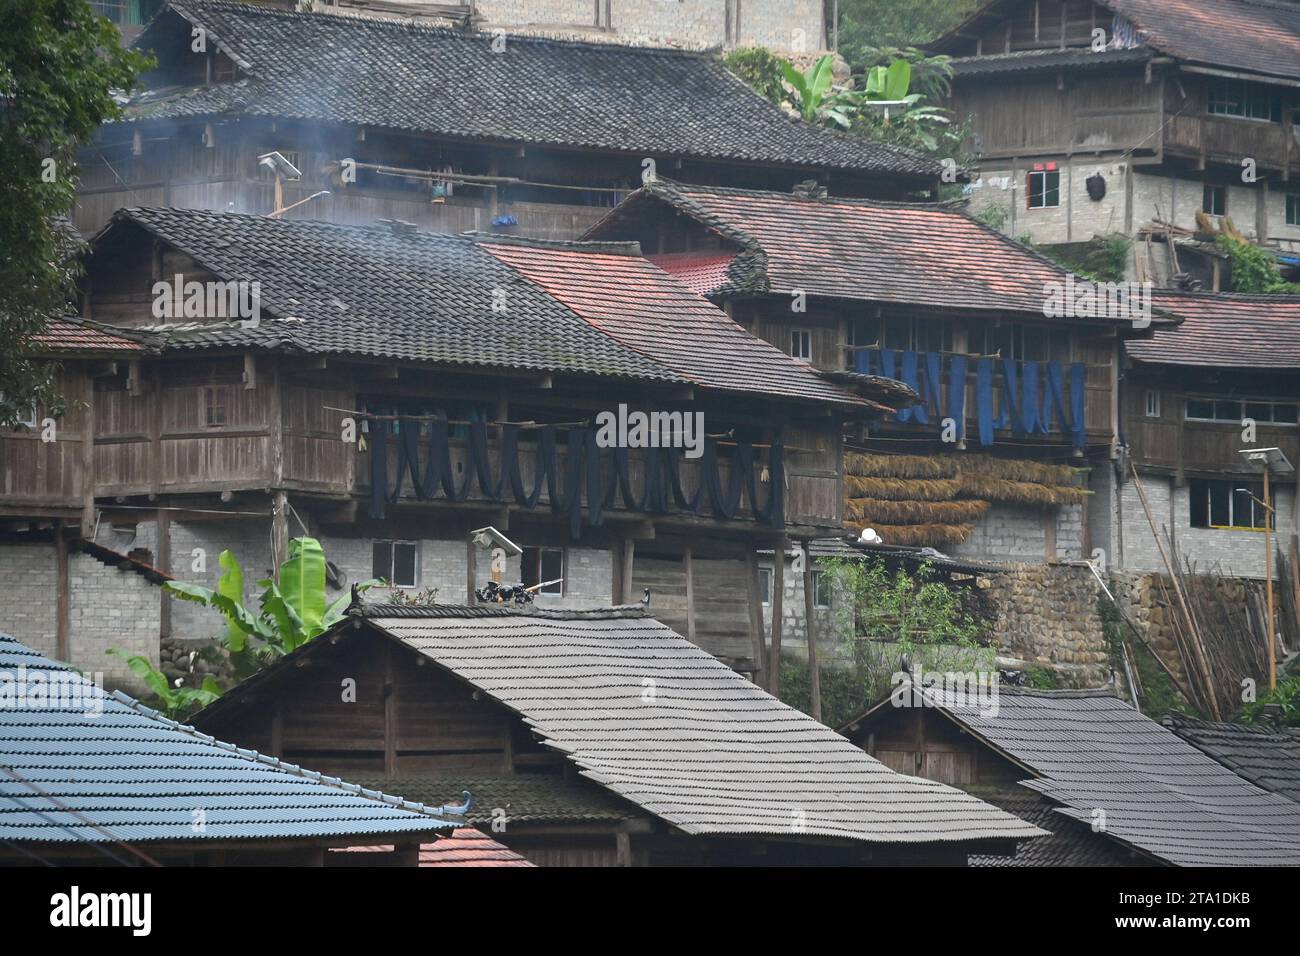 (231128) -- RONGSHUI, Nov. 28, 2023 (Xinhua) -- Pieces of 'Liang Bu', a kind of traditional hand-made cloth of Miao ethnic group, are dried outside the windows of stilt buildings in Wuying Village on the border between south China's Guangxi Zhuang Autonomous Region and southwest China's Guizhou Province, on Oct. 10, 2023. Wuying Village is a Miao ethnic group hamlet that nestles snugly in the towering mountains stretching across the border between Guangxi and Guizhou. Most villagers are still living in traditional wood stilt buildings. (Xinhua/Huang Xiaobang) Stock Photo